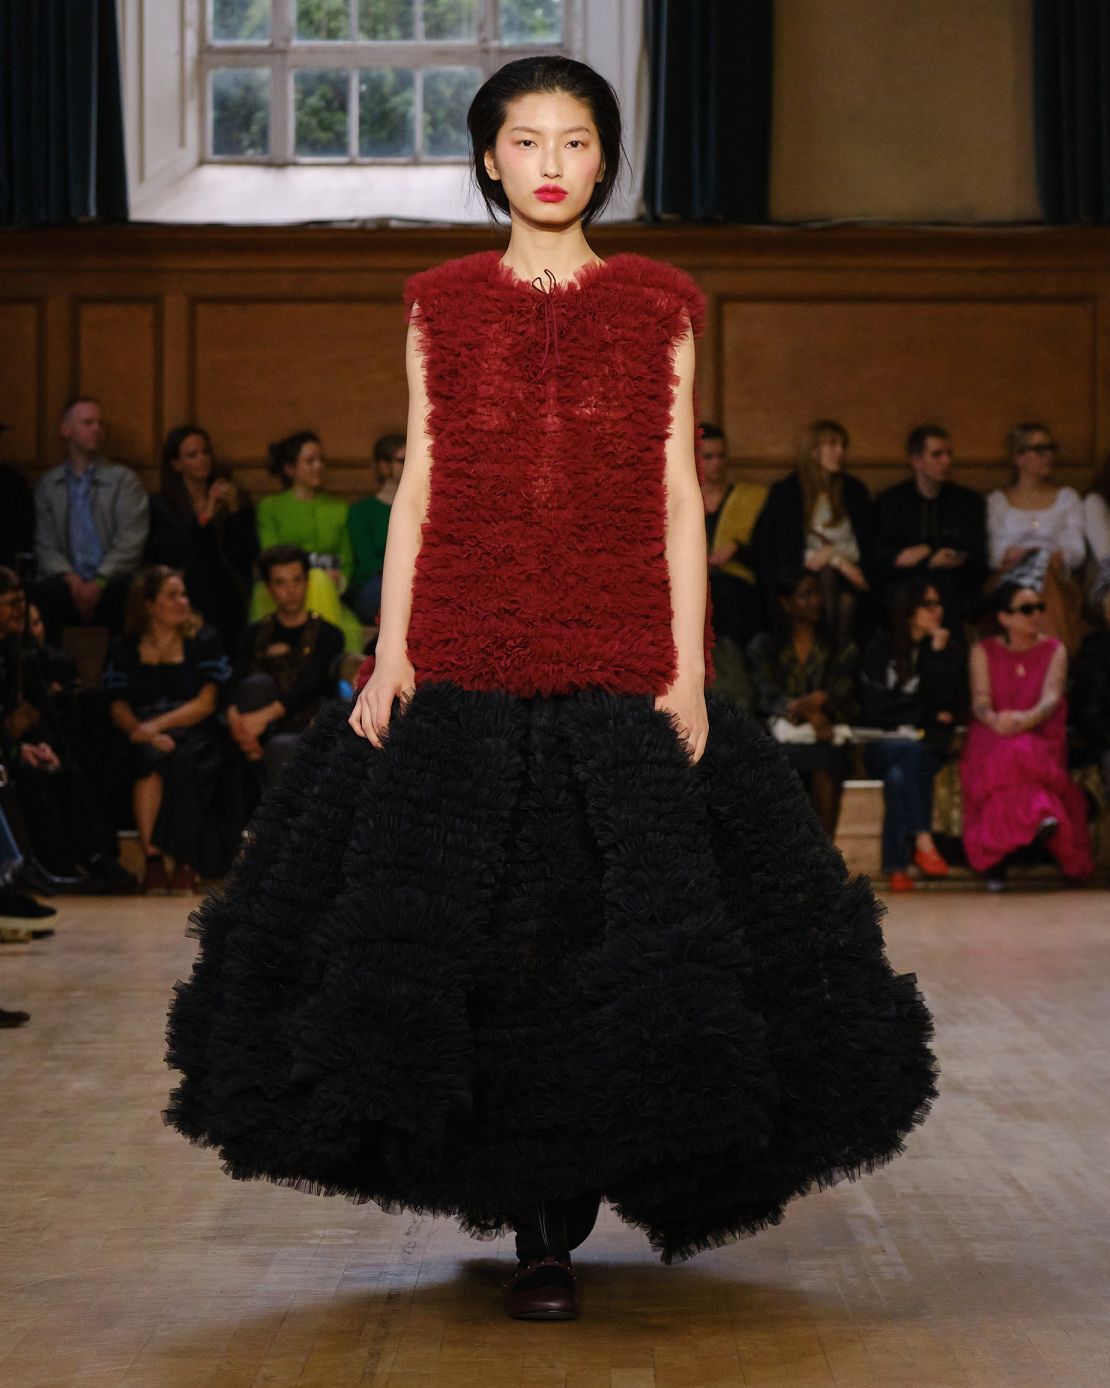 Molly Goddard's frilly, feminine creations were given a new edge in moodier colors like maroon and black.